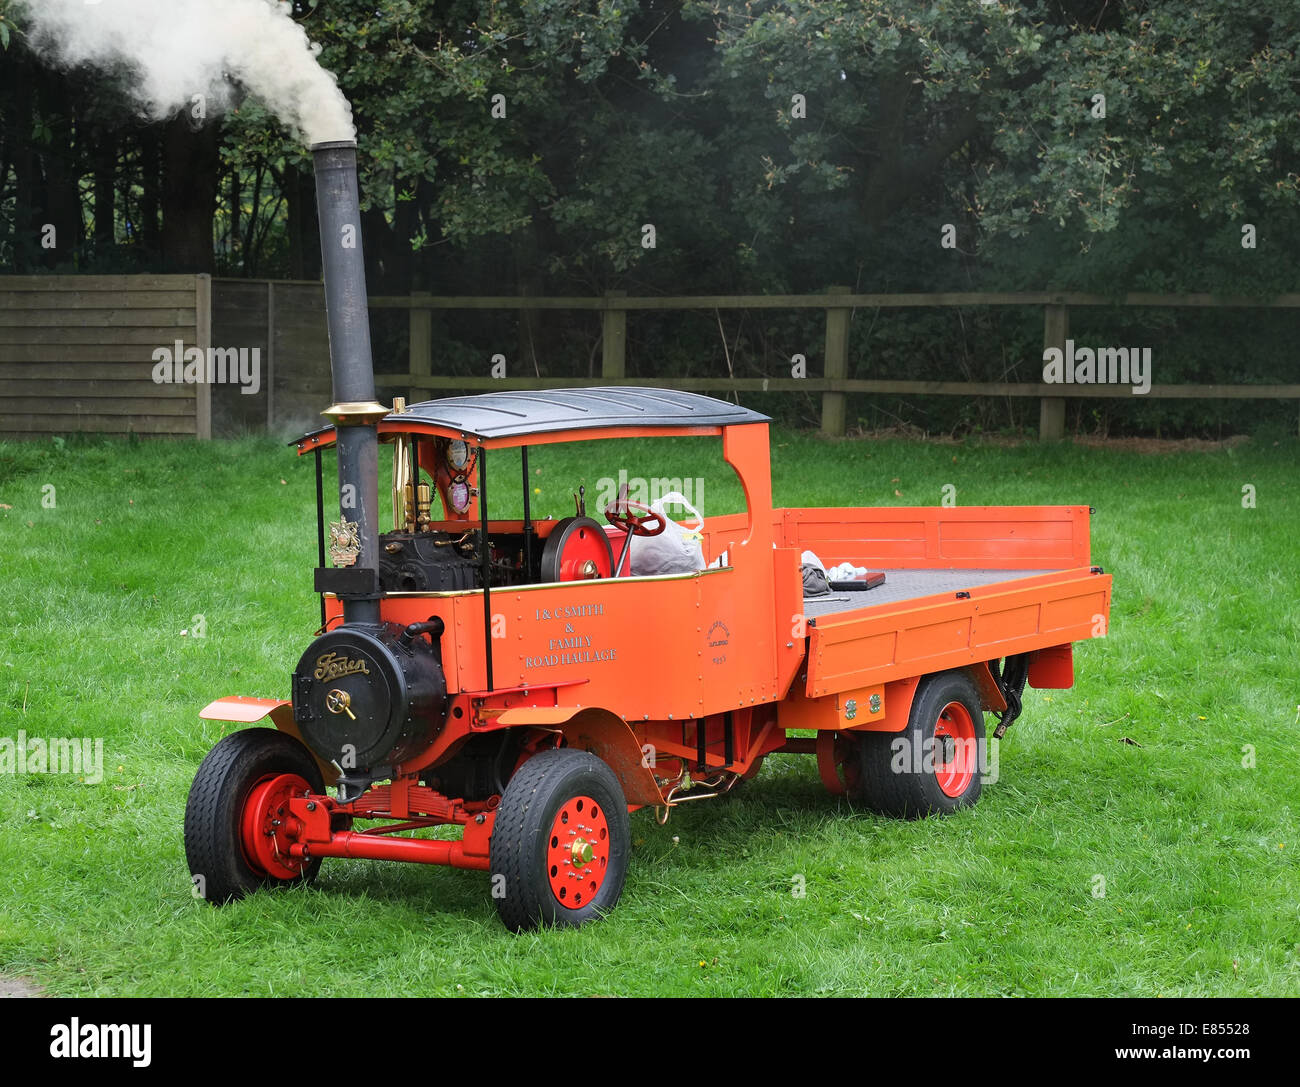 Model steam engines on show at rally in parkland. Stock Photo